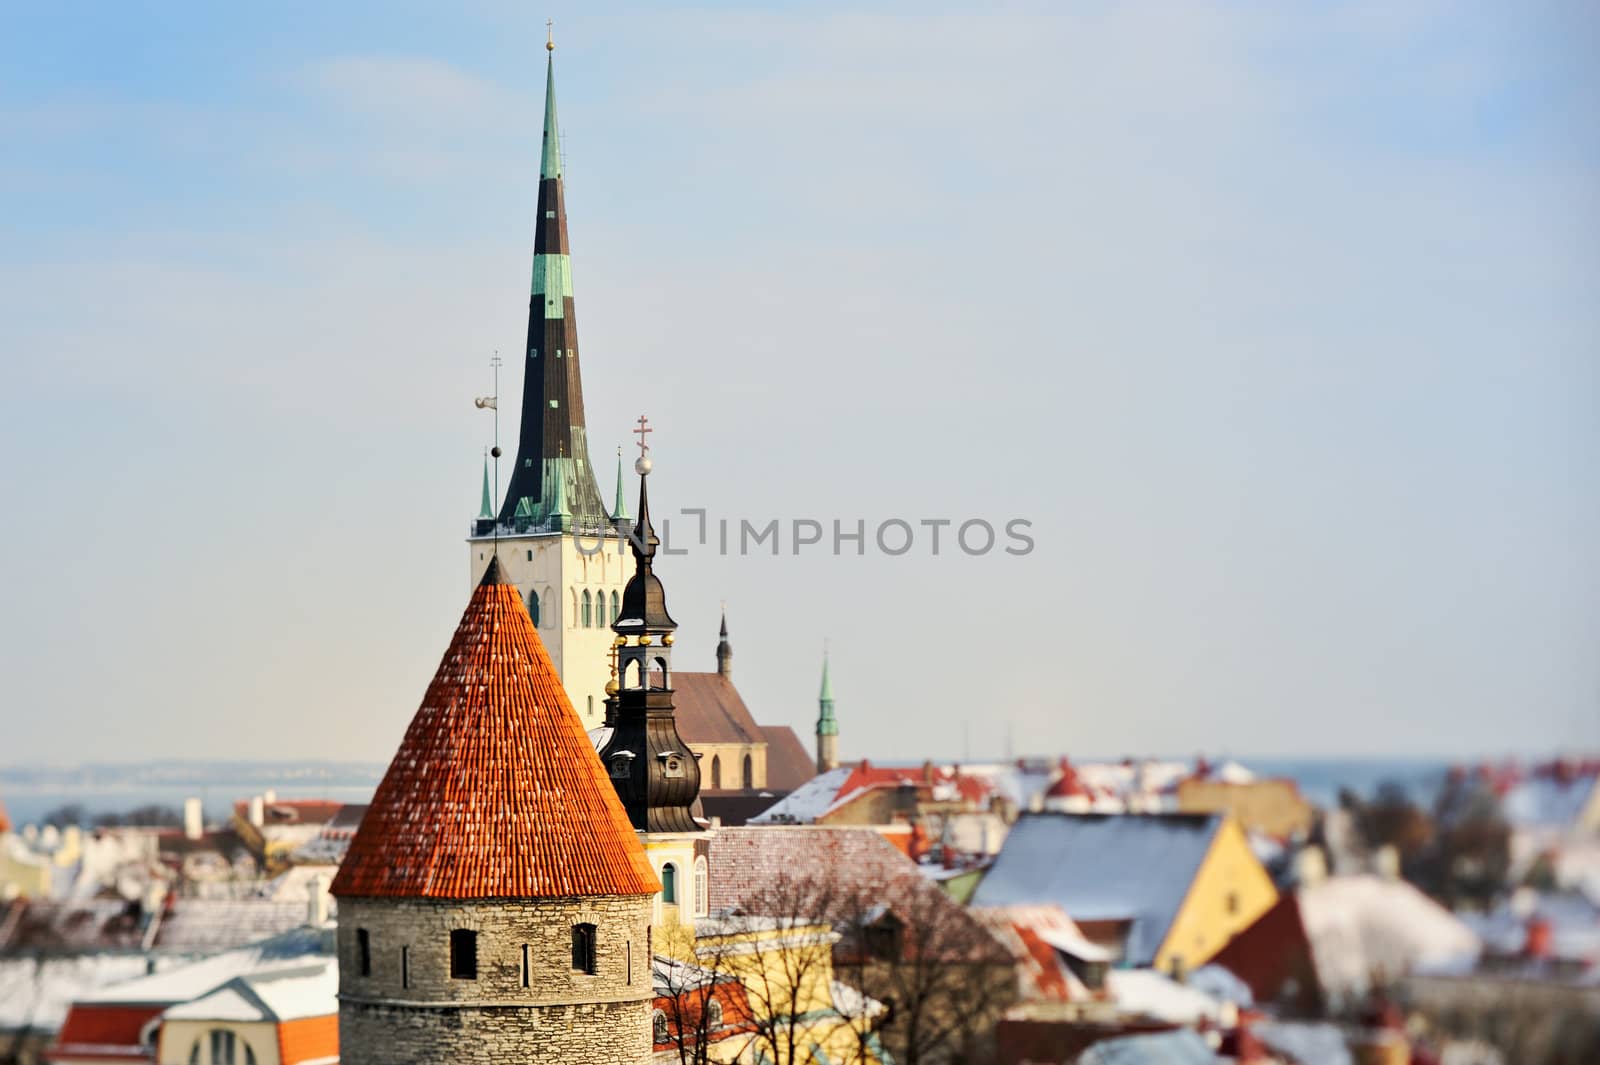 Panorama old City by styf22